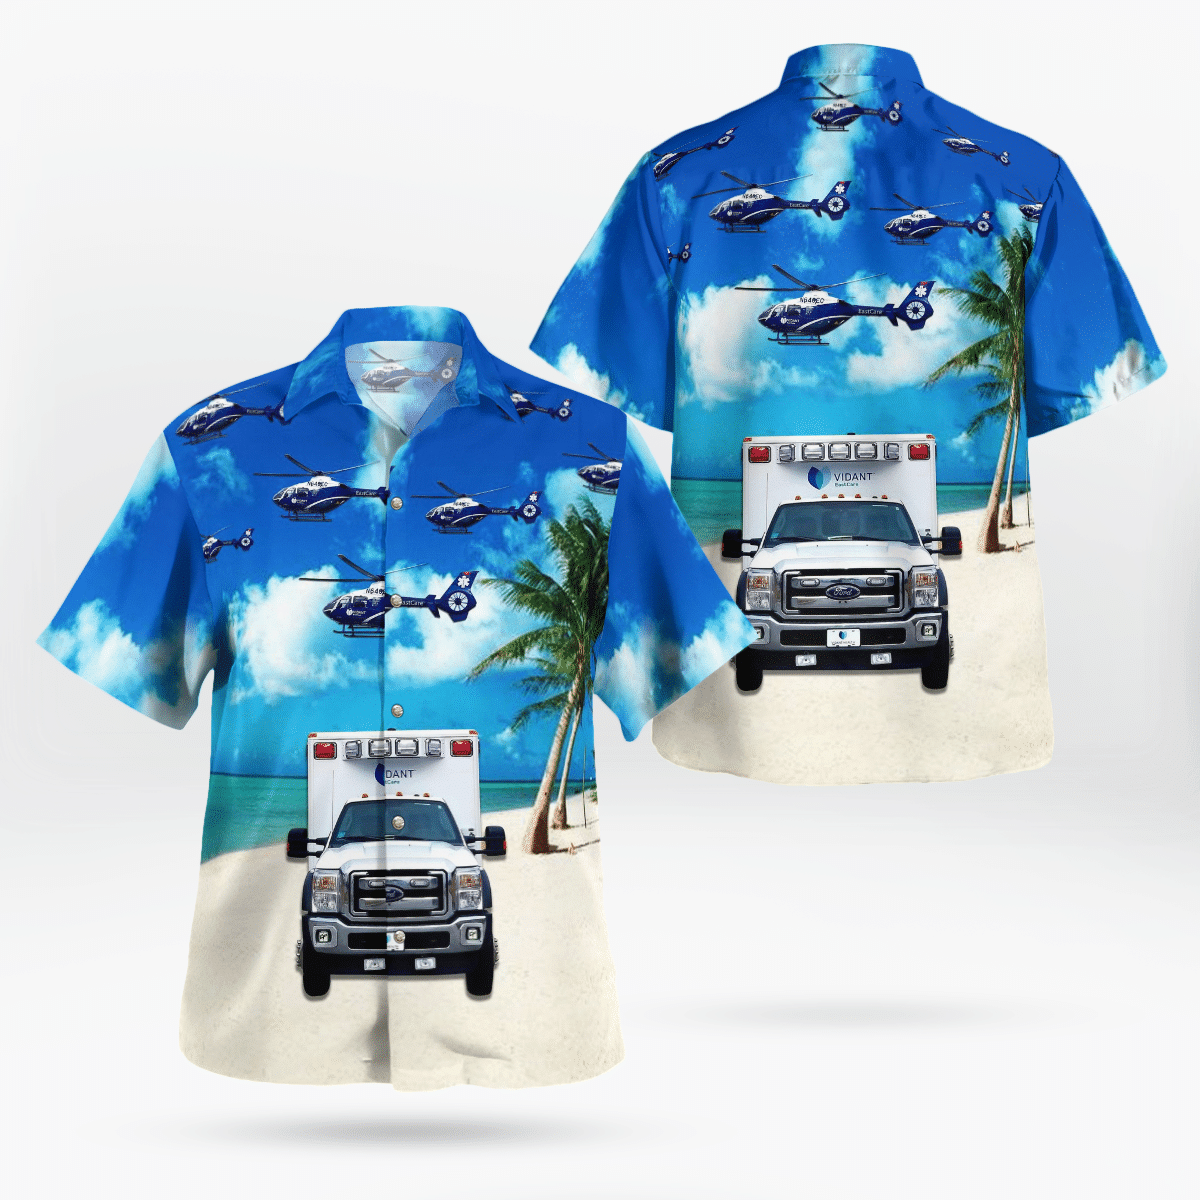 If you are in need of a new summertime look, pick up this Hawaiian shirt 191